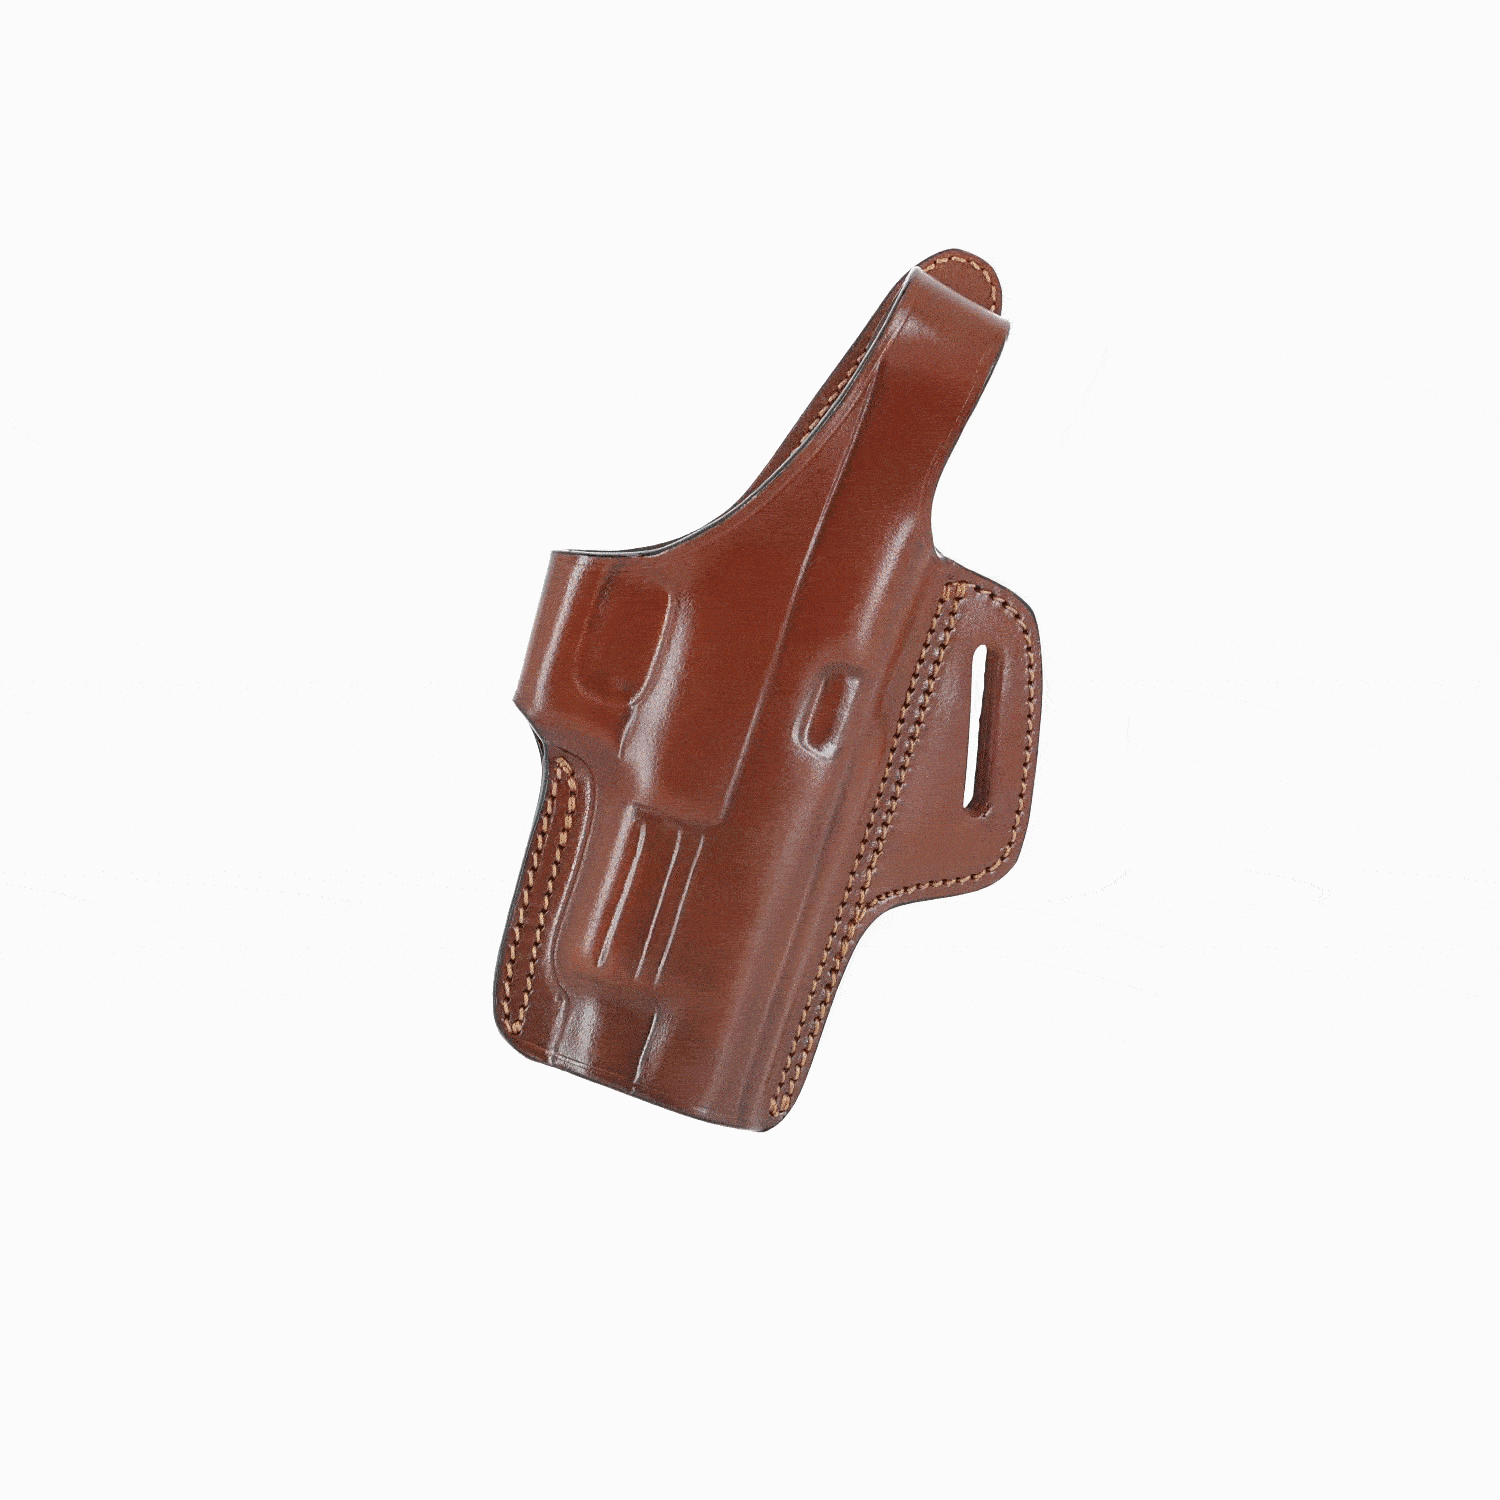 OWB leather holster with thumb break